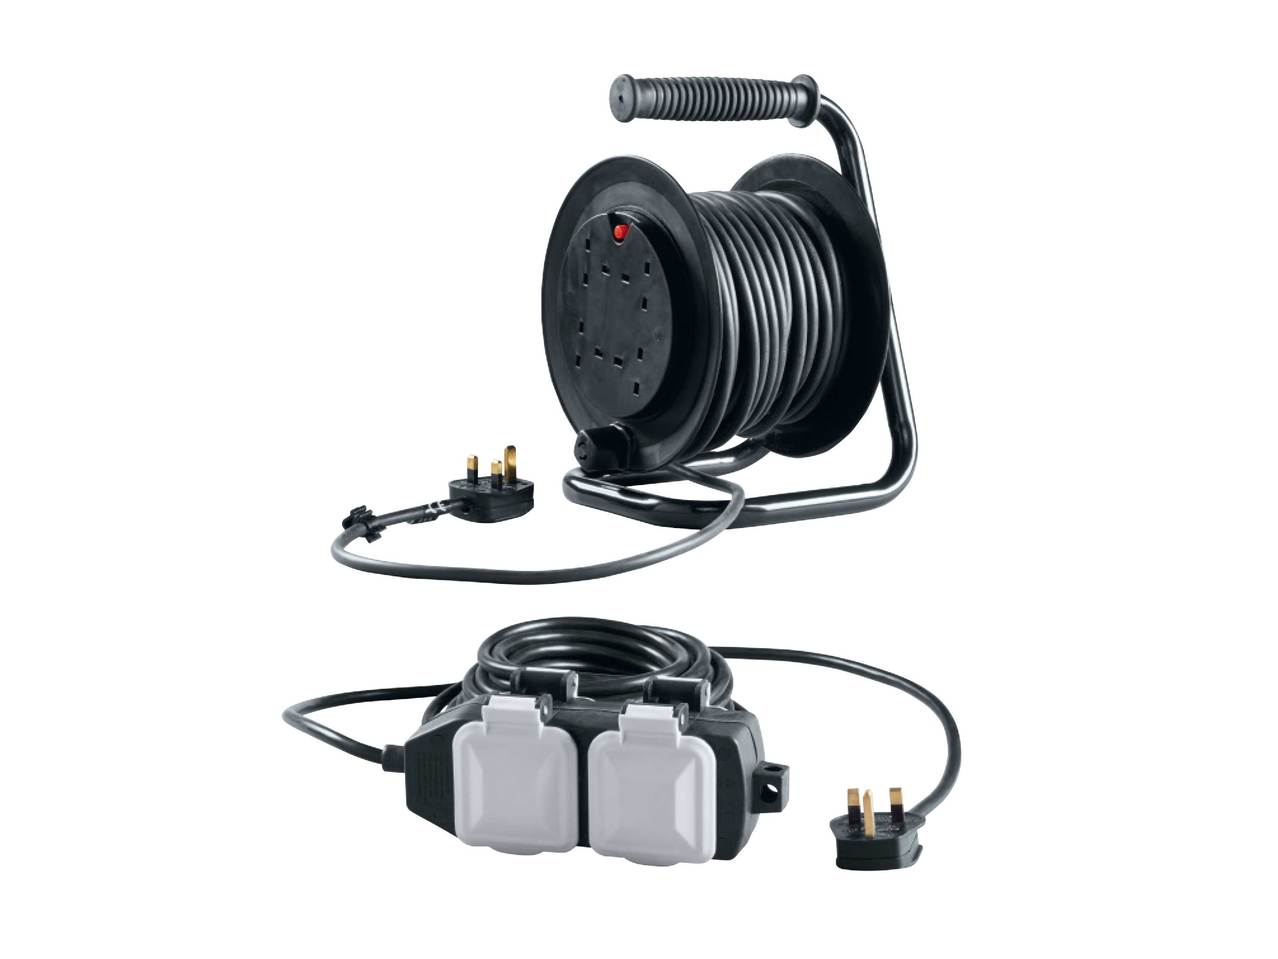 POWERFIX Cable Reel/ Extension Cable